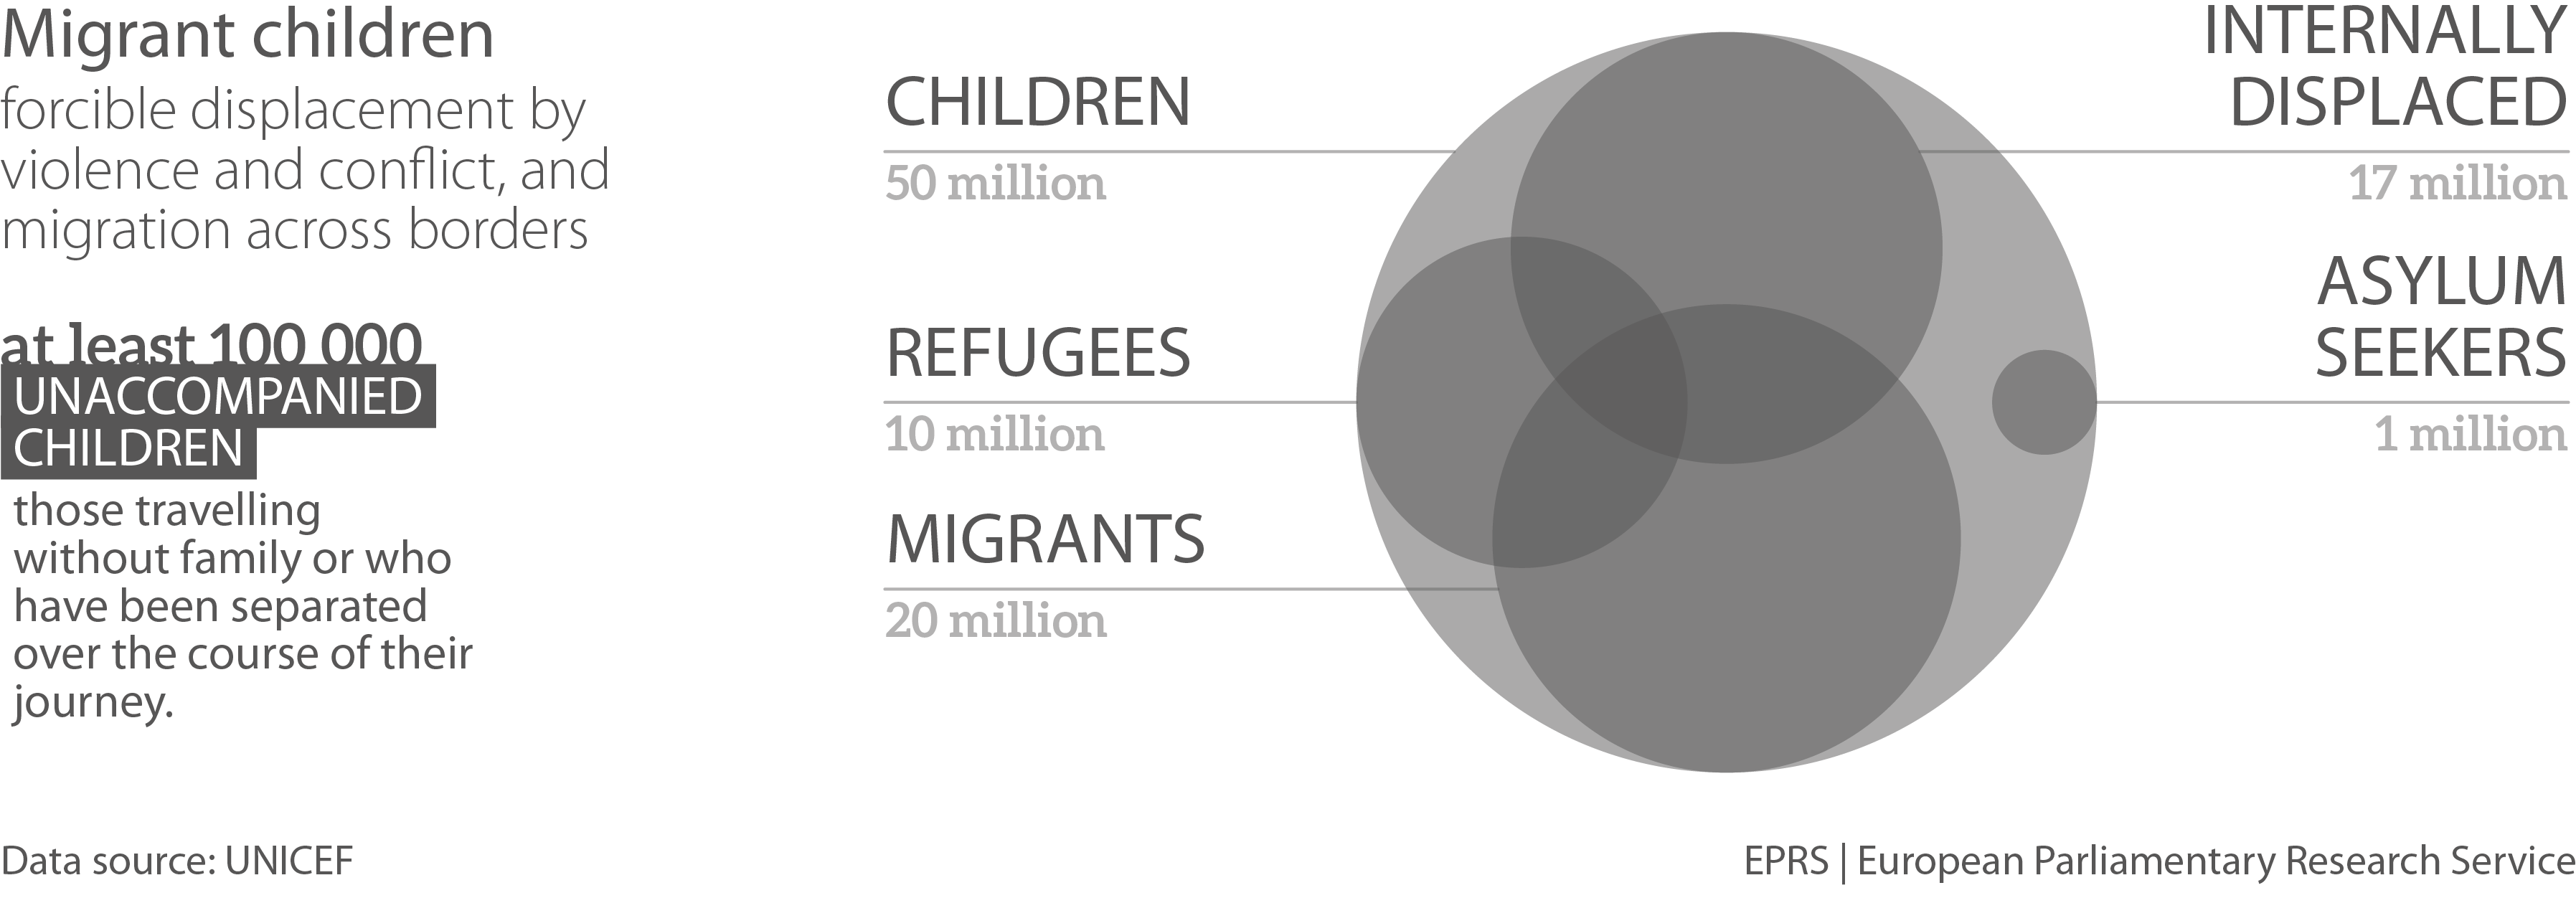 Children on the Move Globally in 2015 (absolute numbers)